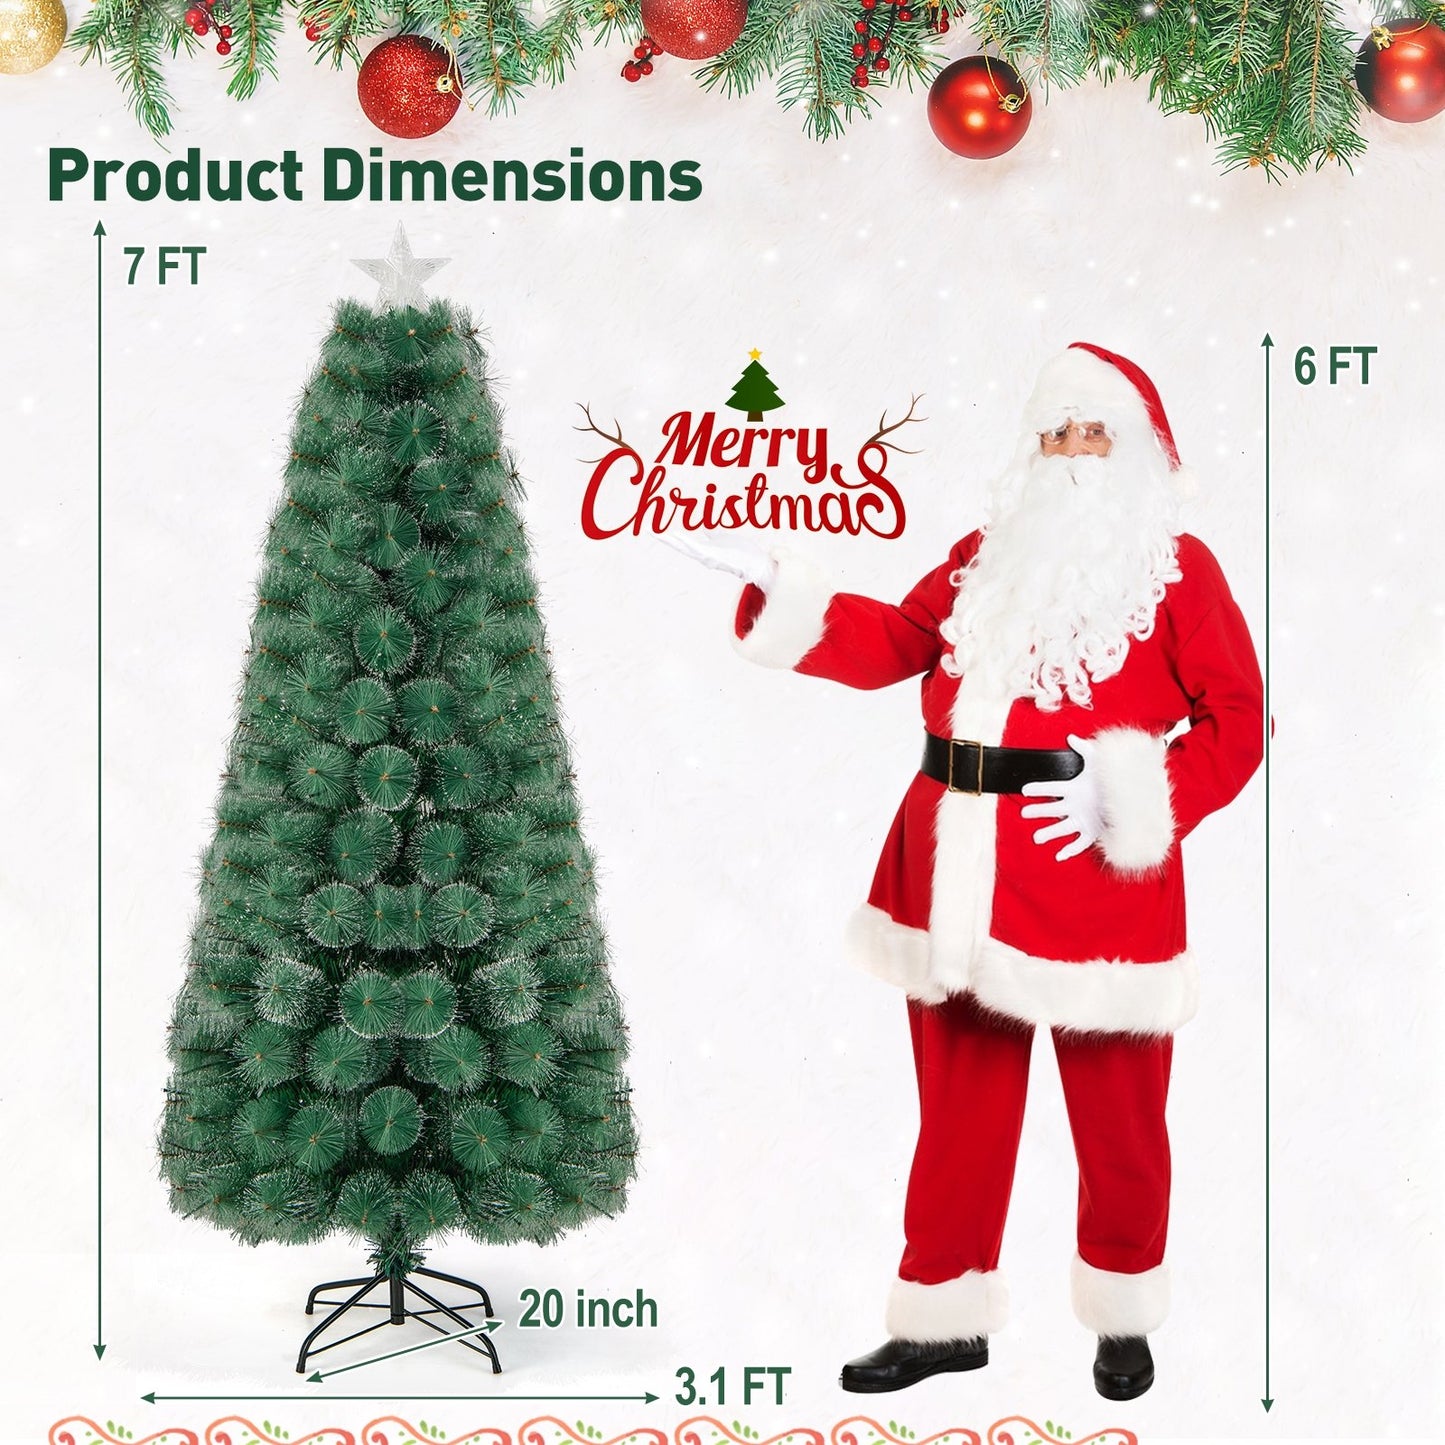 5/6/7 FT Pre-Lit Fiber Optic Christmas Tree with 148/185/226 Multi-Color LED Lights and Top Star Light-7 ft, Green